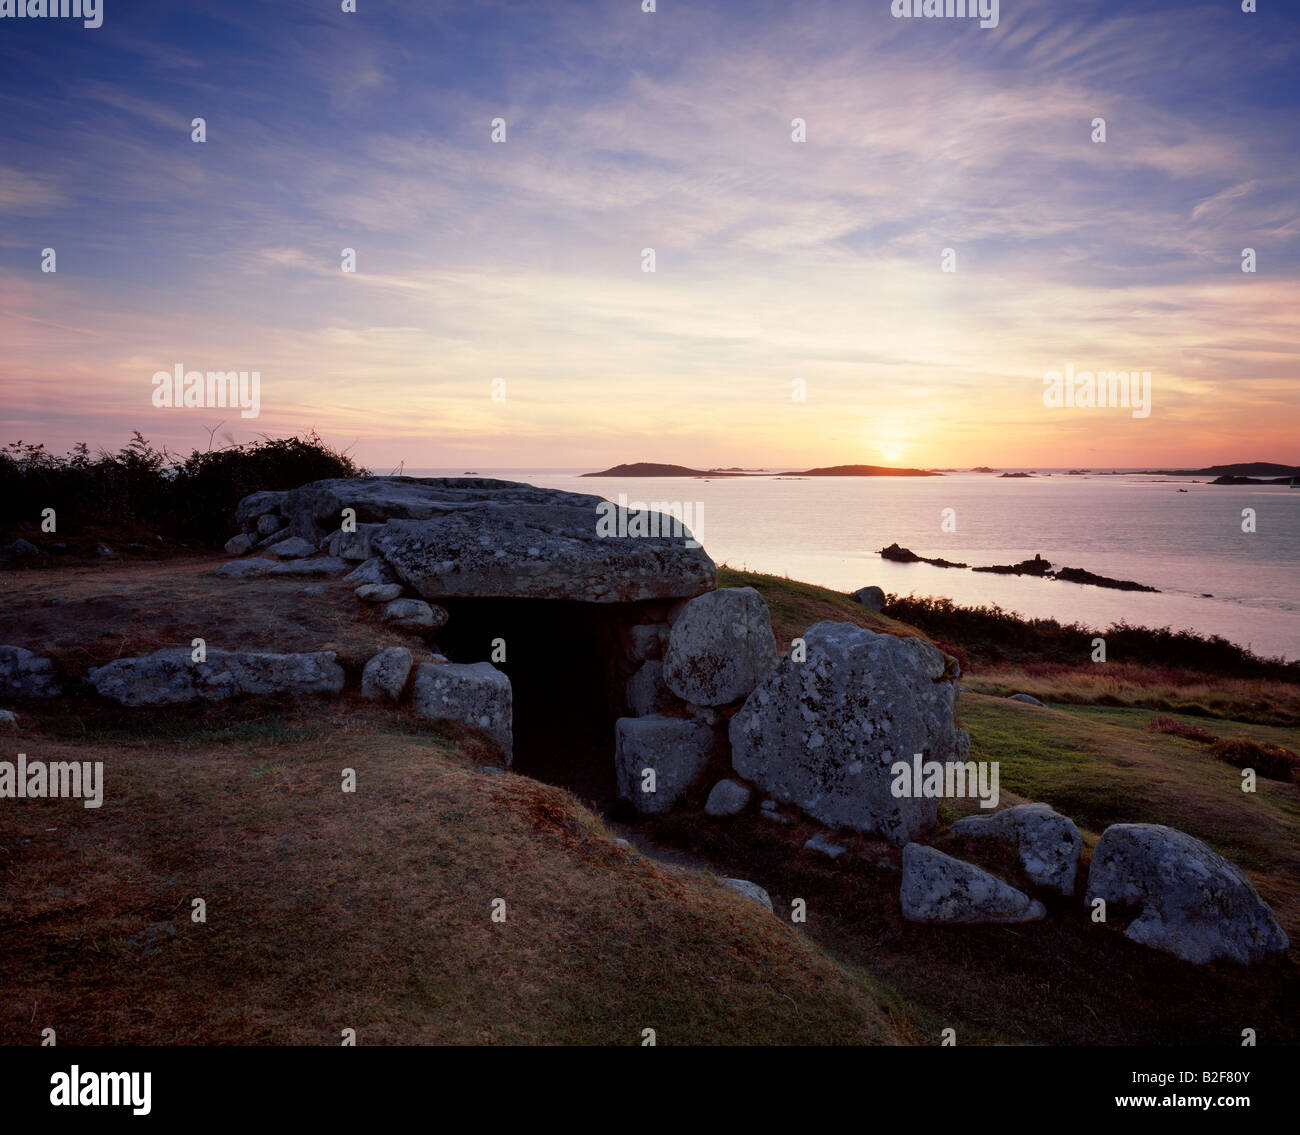 Evening view of Bant's Burial Chamber, St Mary's, Isles of Scilly. Cornwall. United Kingdom. Stock Photo